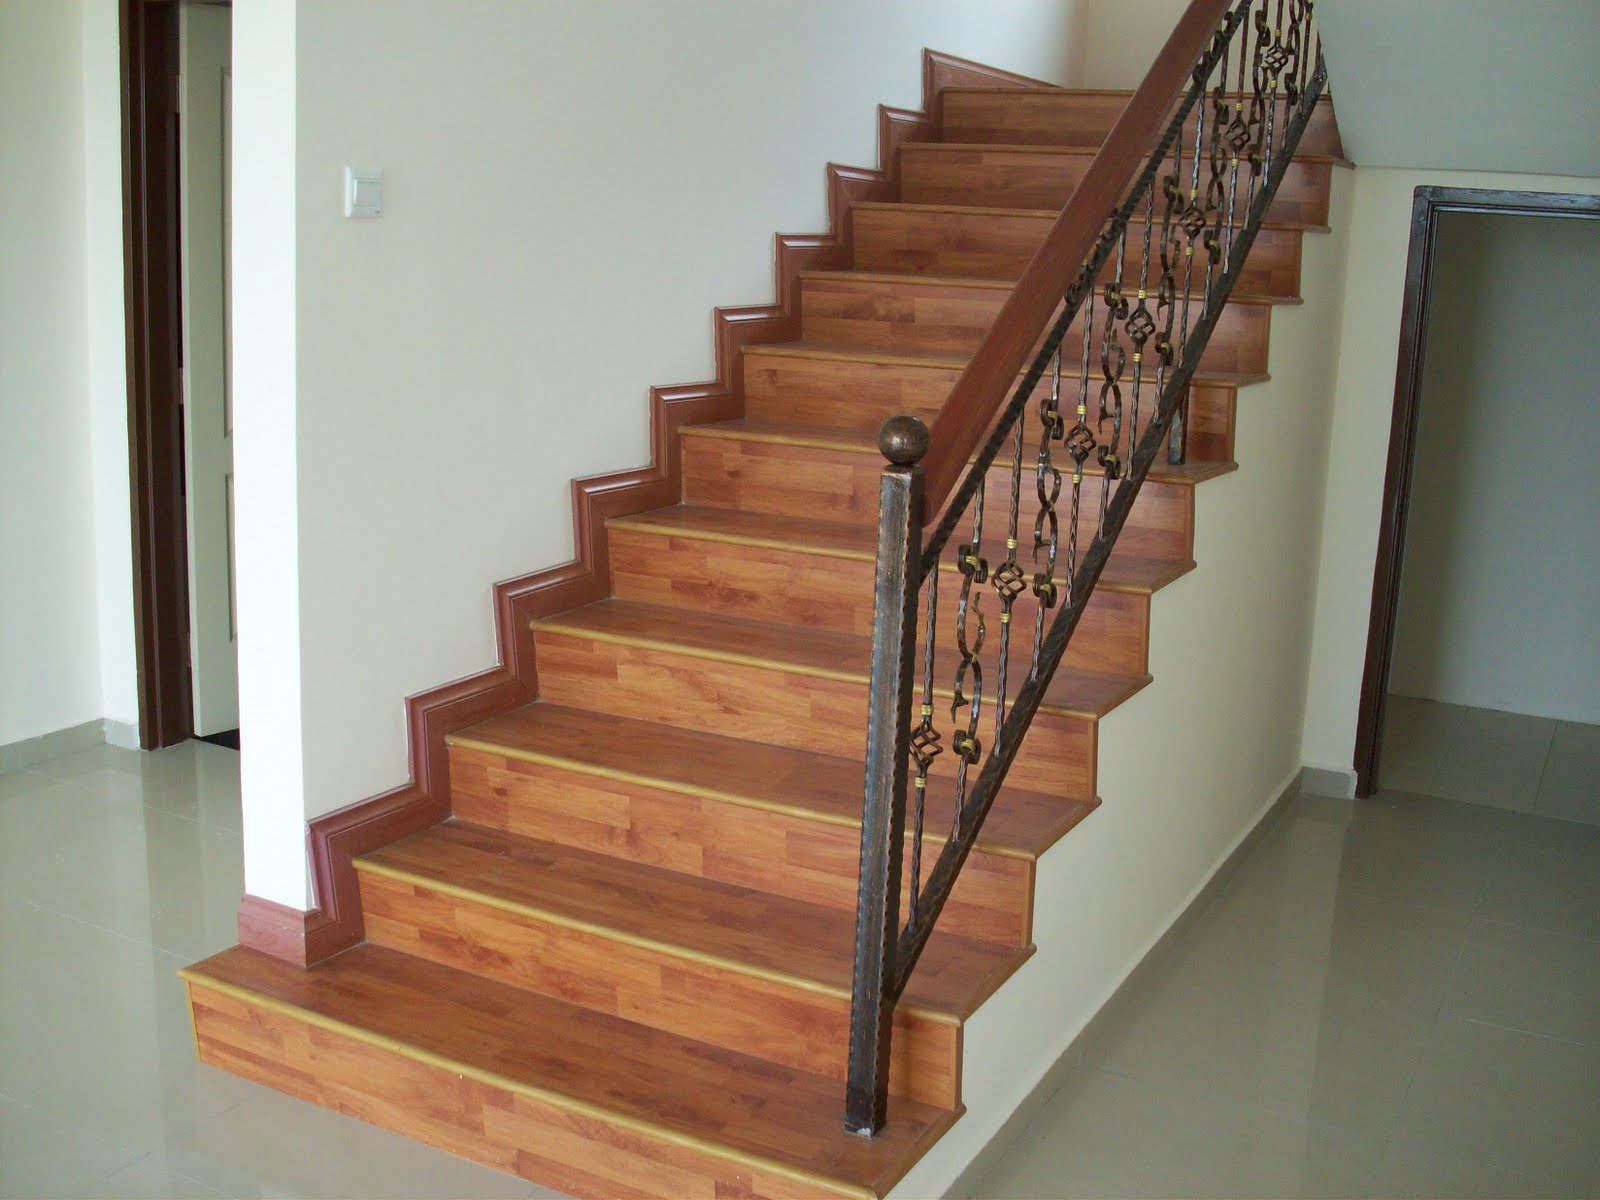 How To Install Wood Flooring On Stairs, How To Cover Stairs With Wood Flooring